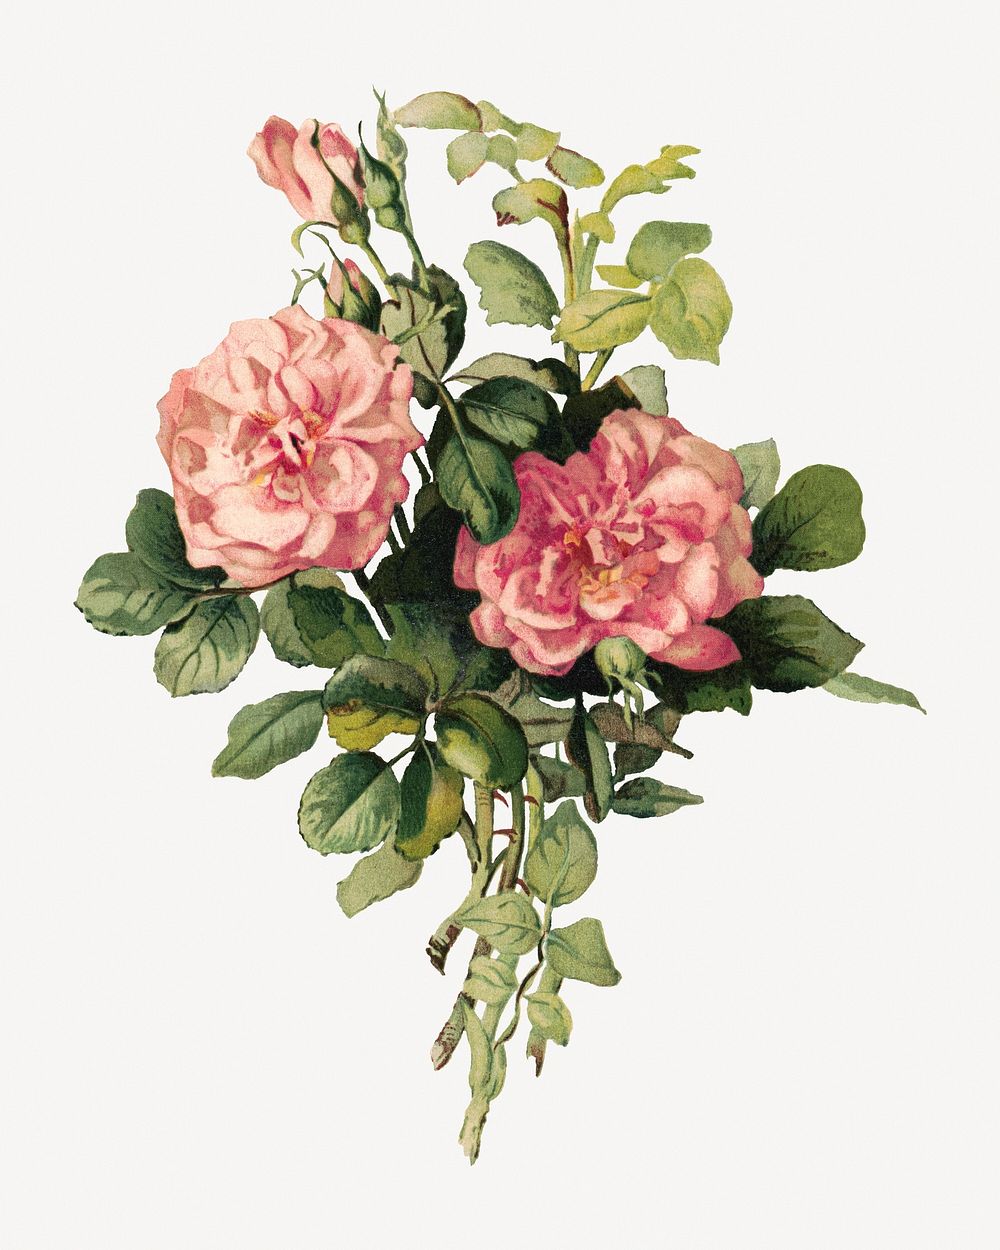 Aesthetic blush roses psd.   Remastered by rawpixel